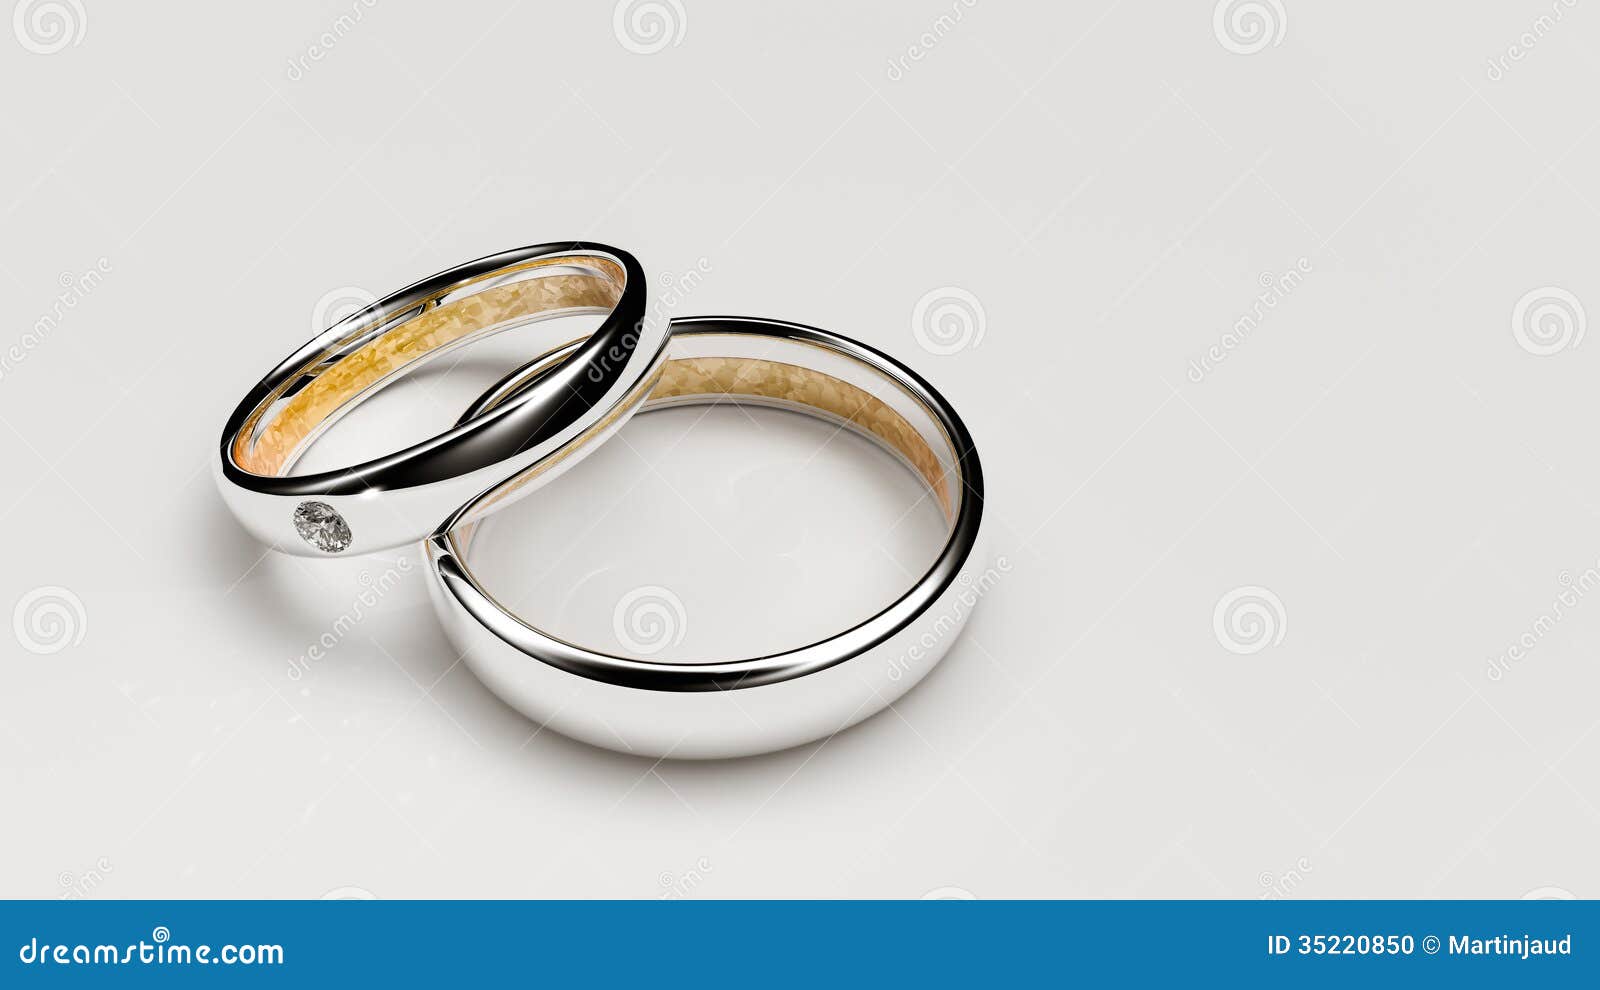 Pair of lovers wedding rings with a small diamond.